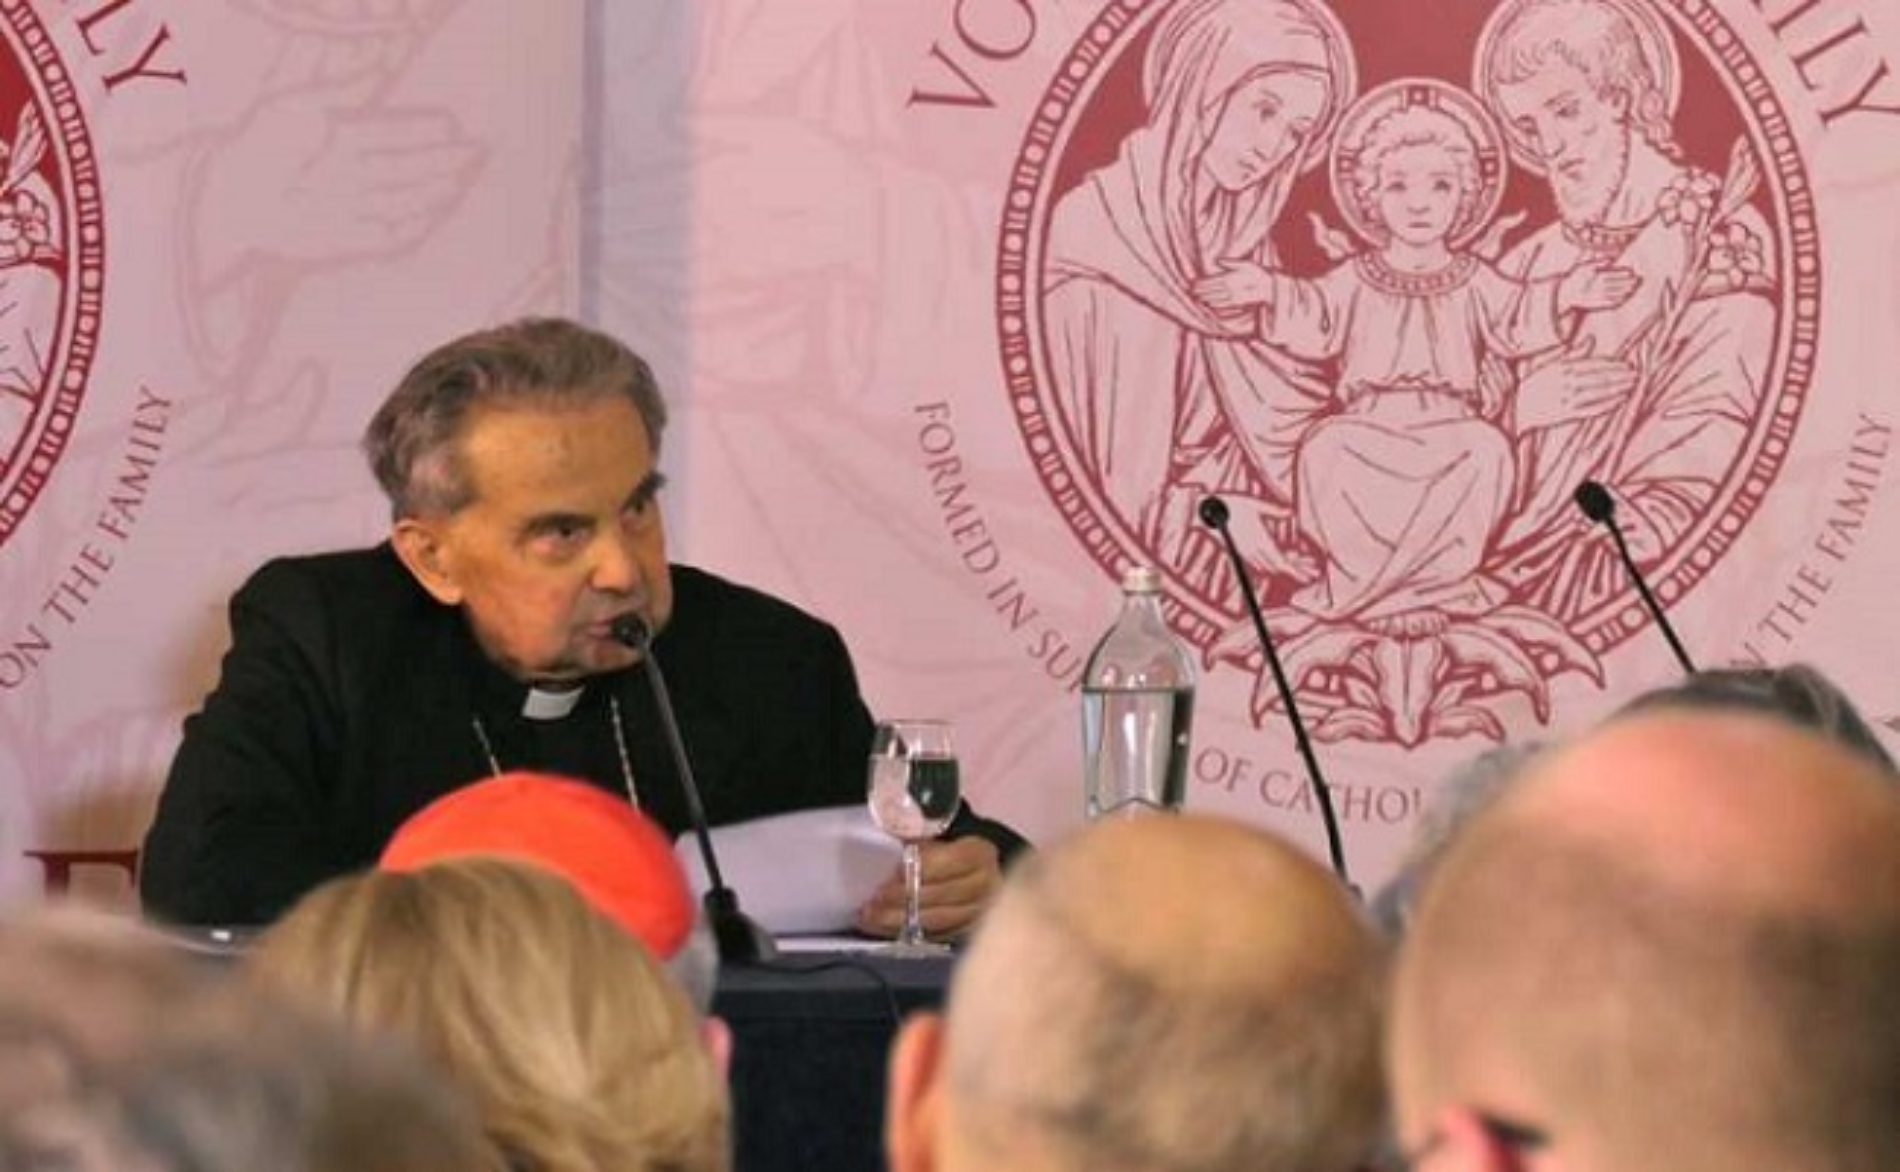 Italian Cardinal Says Abortion And Homosexuality Show The ‘Final Battle’ Between God And Satan Has Come